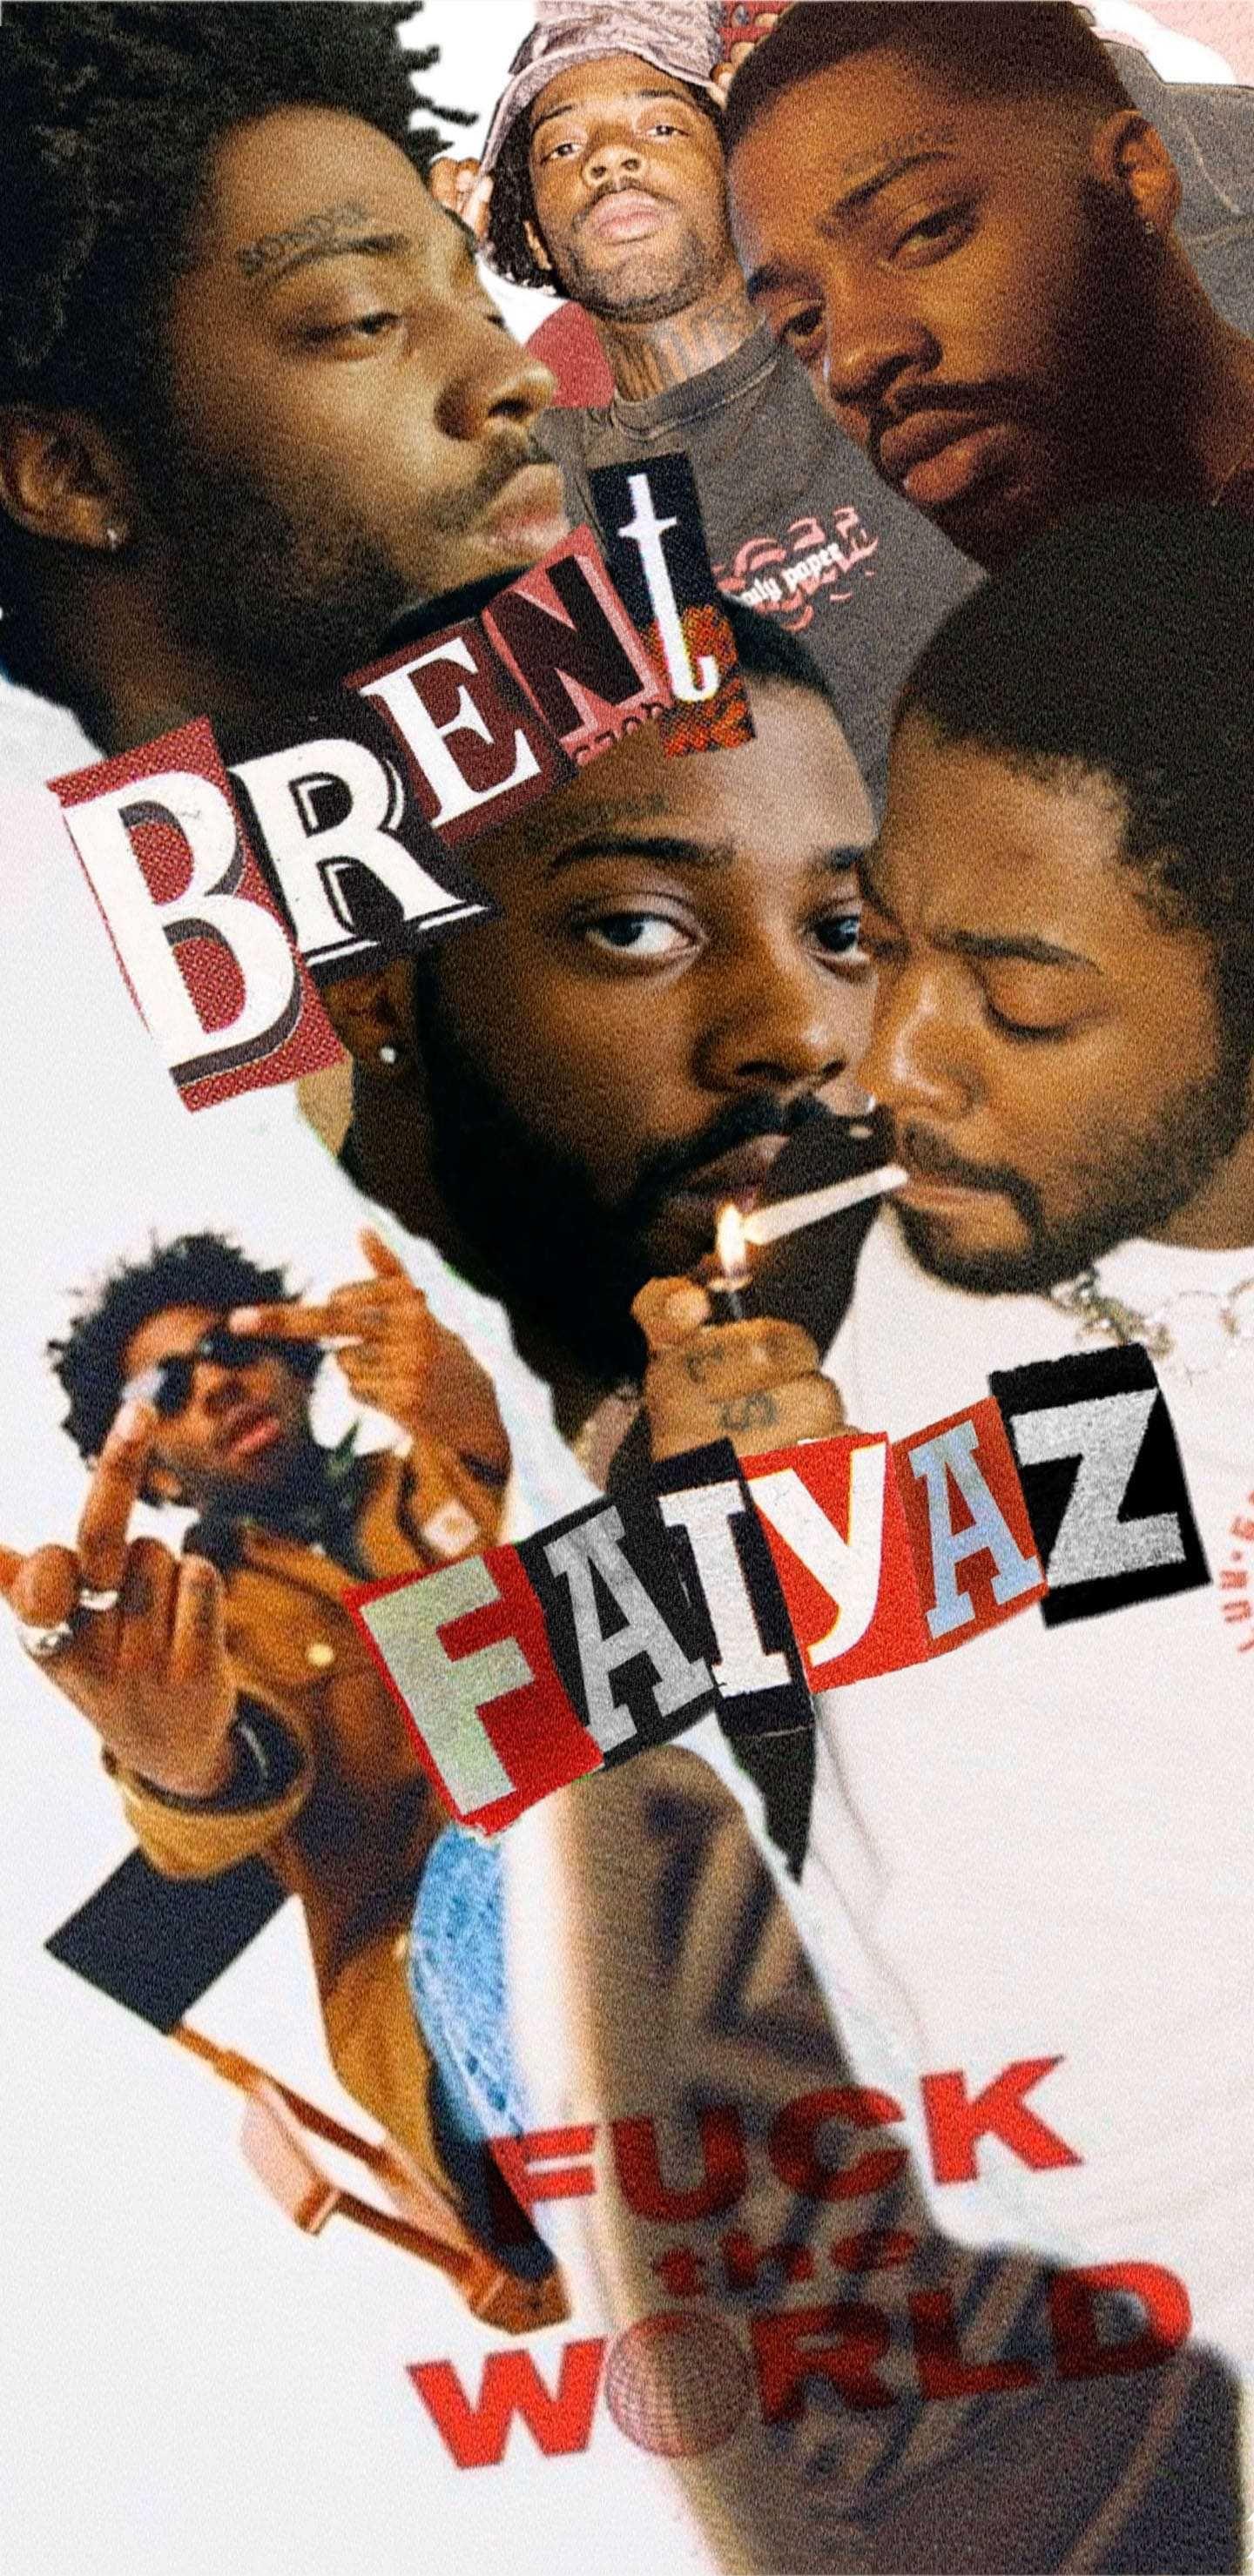 Brent Faiyaz Wallpapers iXpap Baby brent Edgy wallpaper Dope